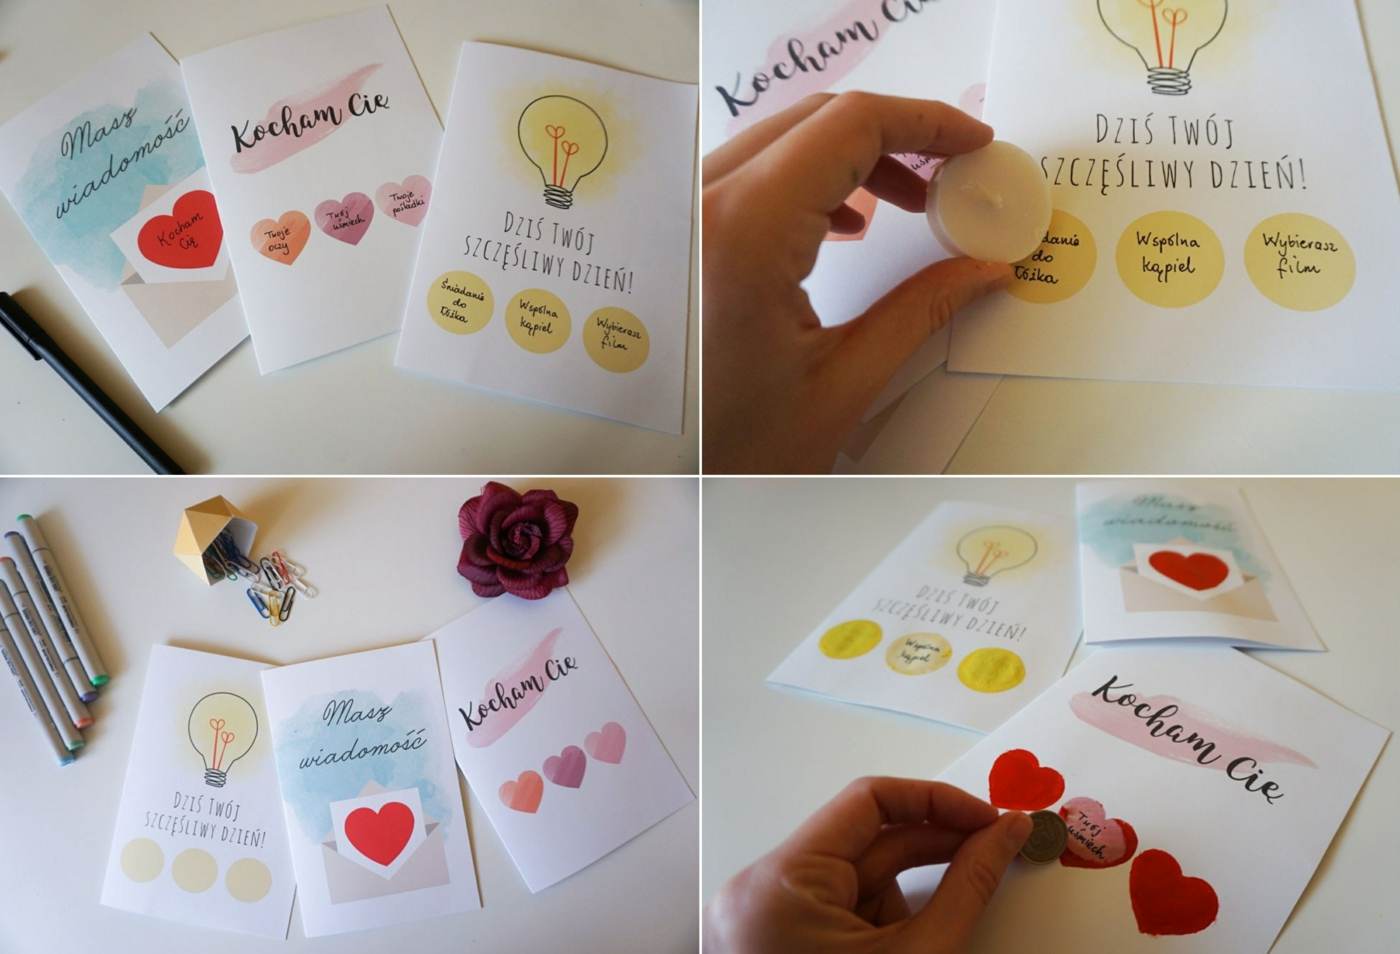 Homemade greeting cards for gifting with amazing rubble